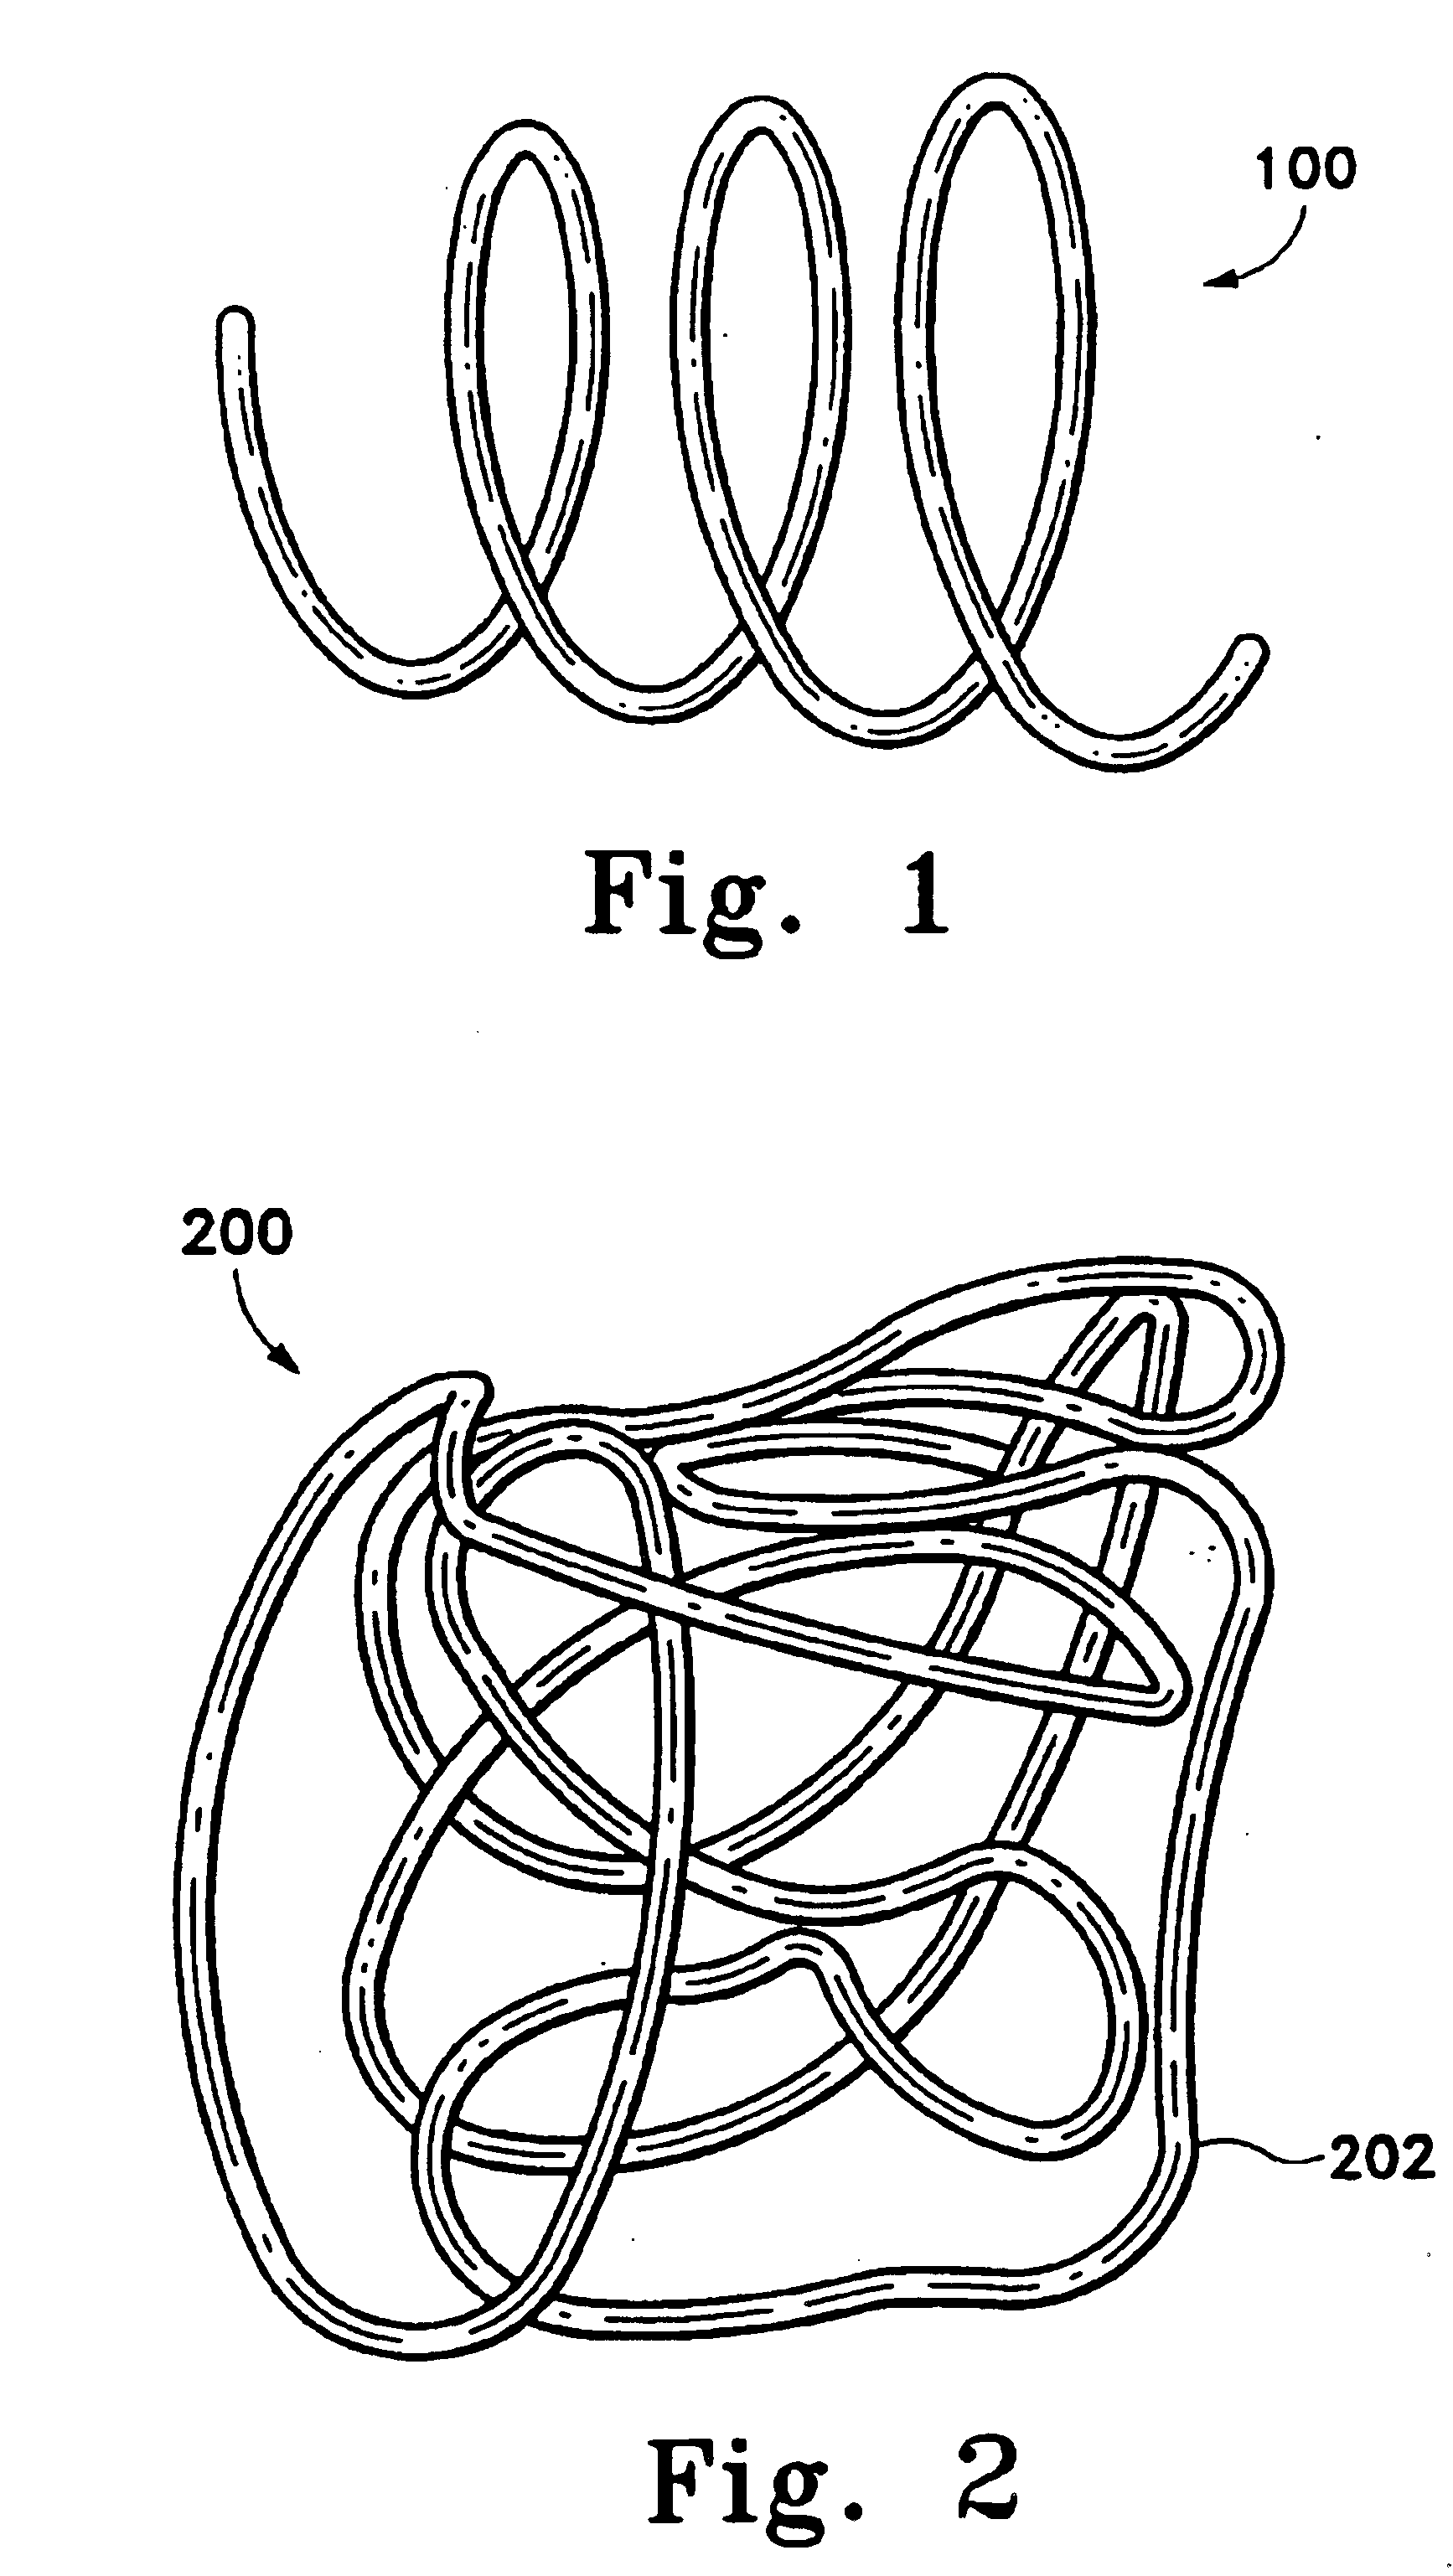 Stable coil designs